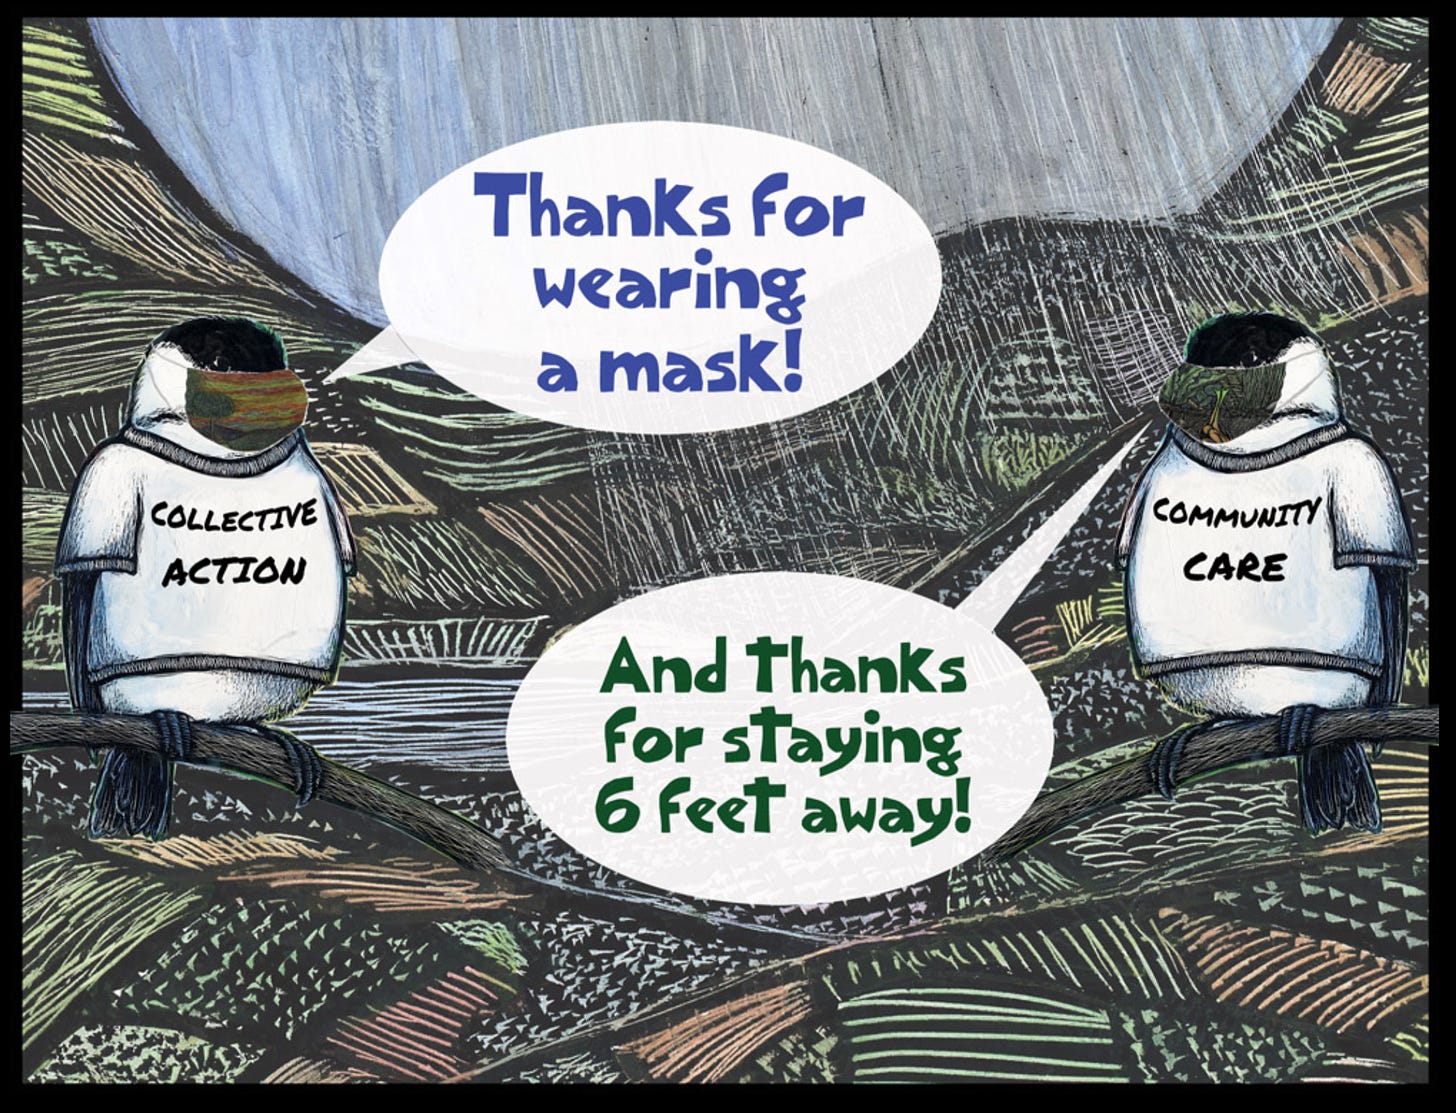 picture is of 2 chickadees on either side of the picture, one chickadee has collective action written on its shirt and has a speech bubble that says thanks for wearing a mask! and the other chickadee has a shirt that says community care and a speech bubble says and thanks for staying 6 feet away